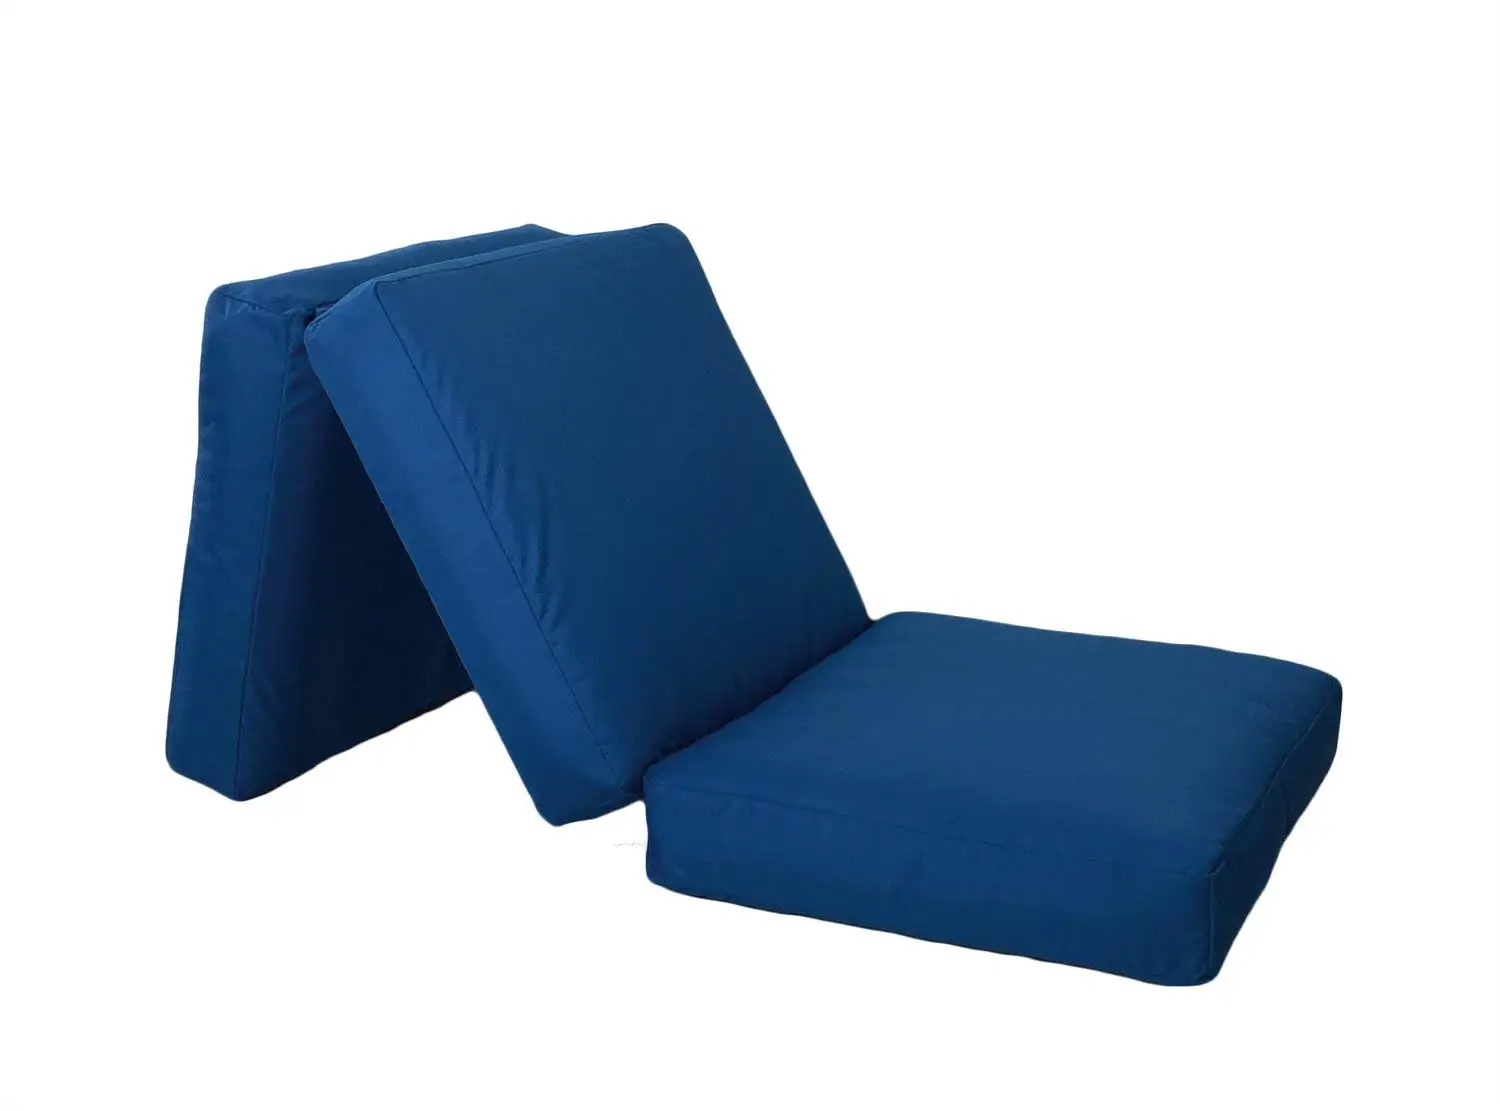 Cheap Inflatable Lounge Chair, find Inflatable Lounge Chair deals on